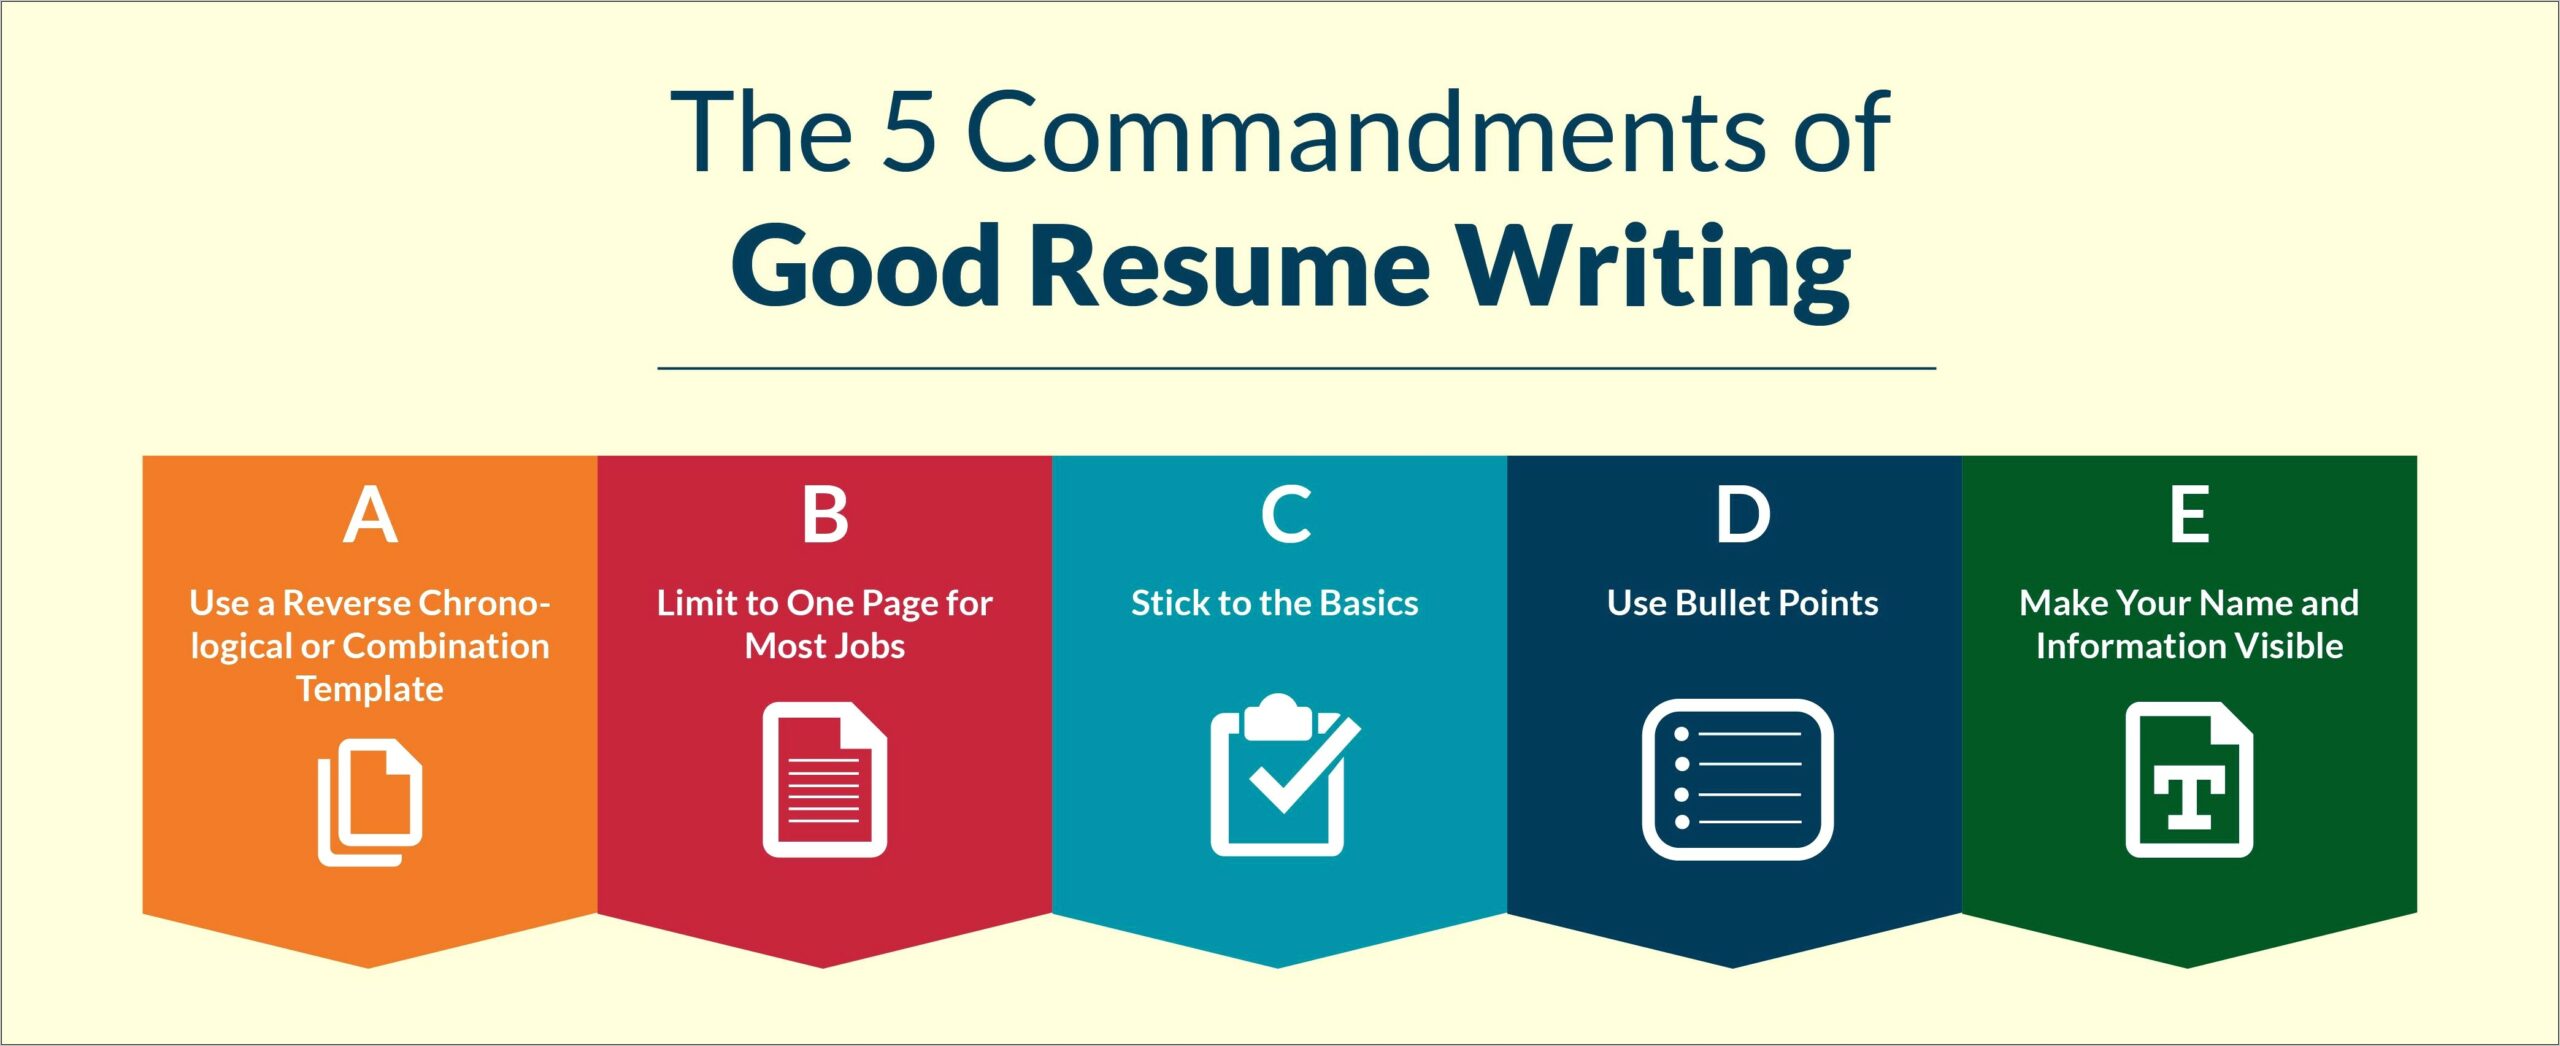 Best Cite To Help Write A Resume